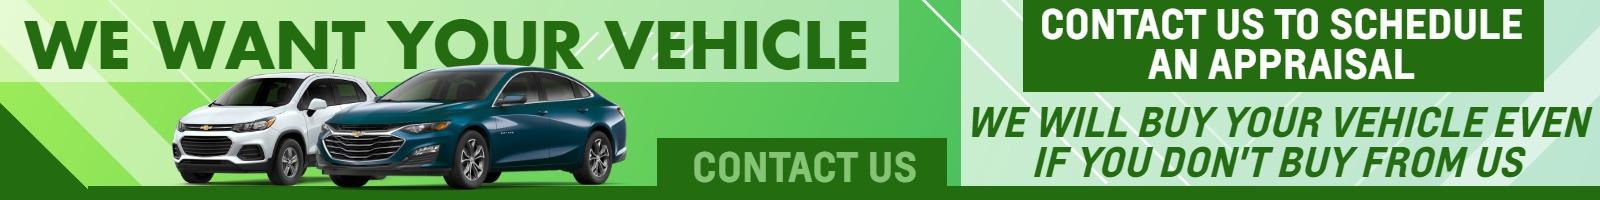 WE WANT YOUR VEHICLE
we will buy your vehicle even if you dont buy from us.
Contact us to schedule an appraisal.